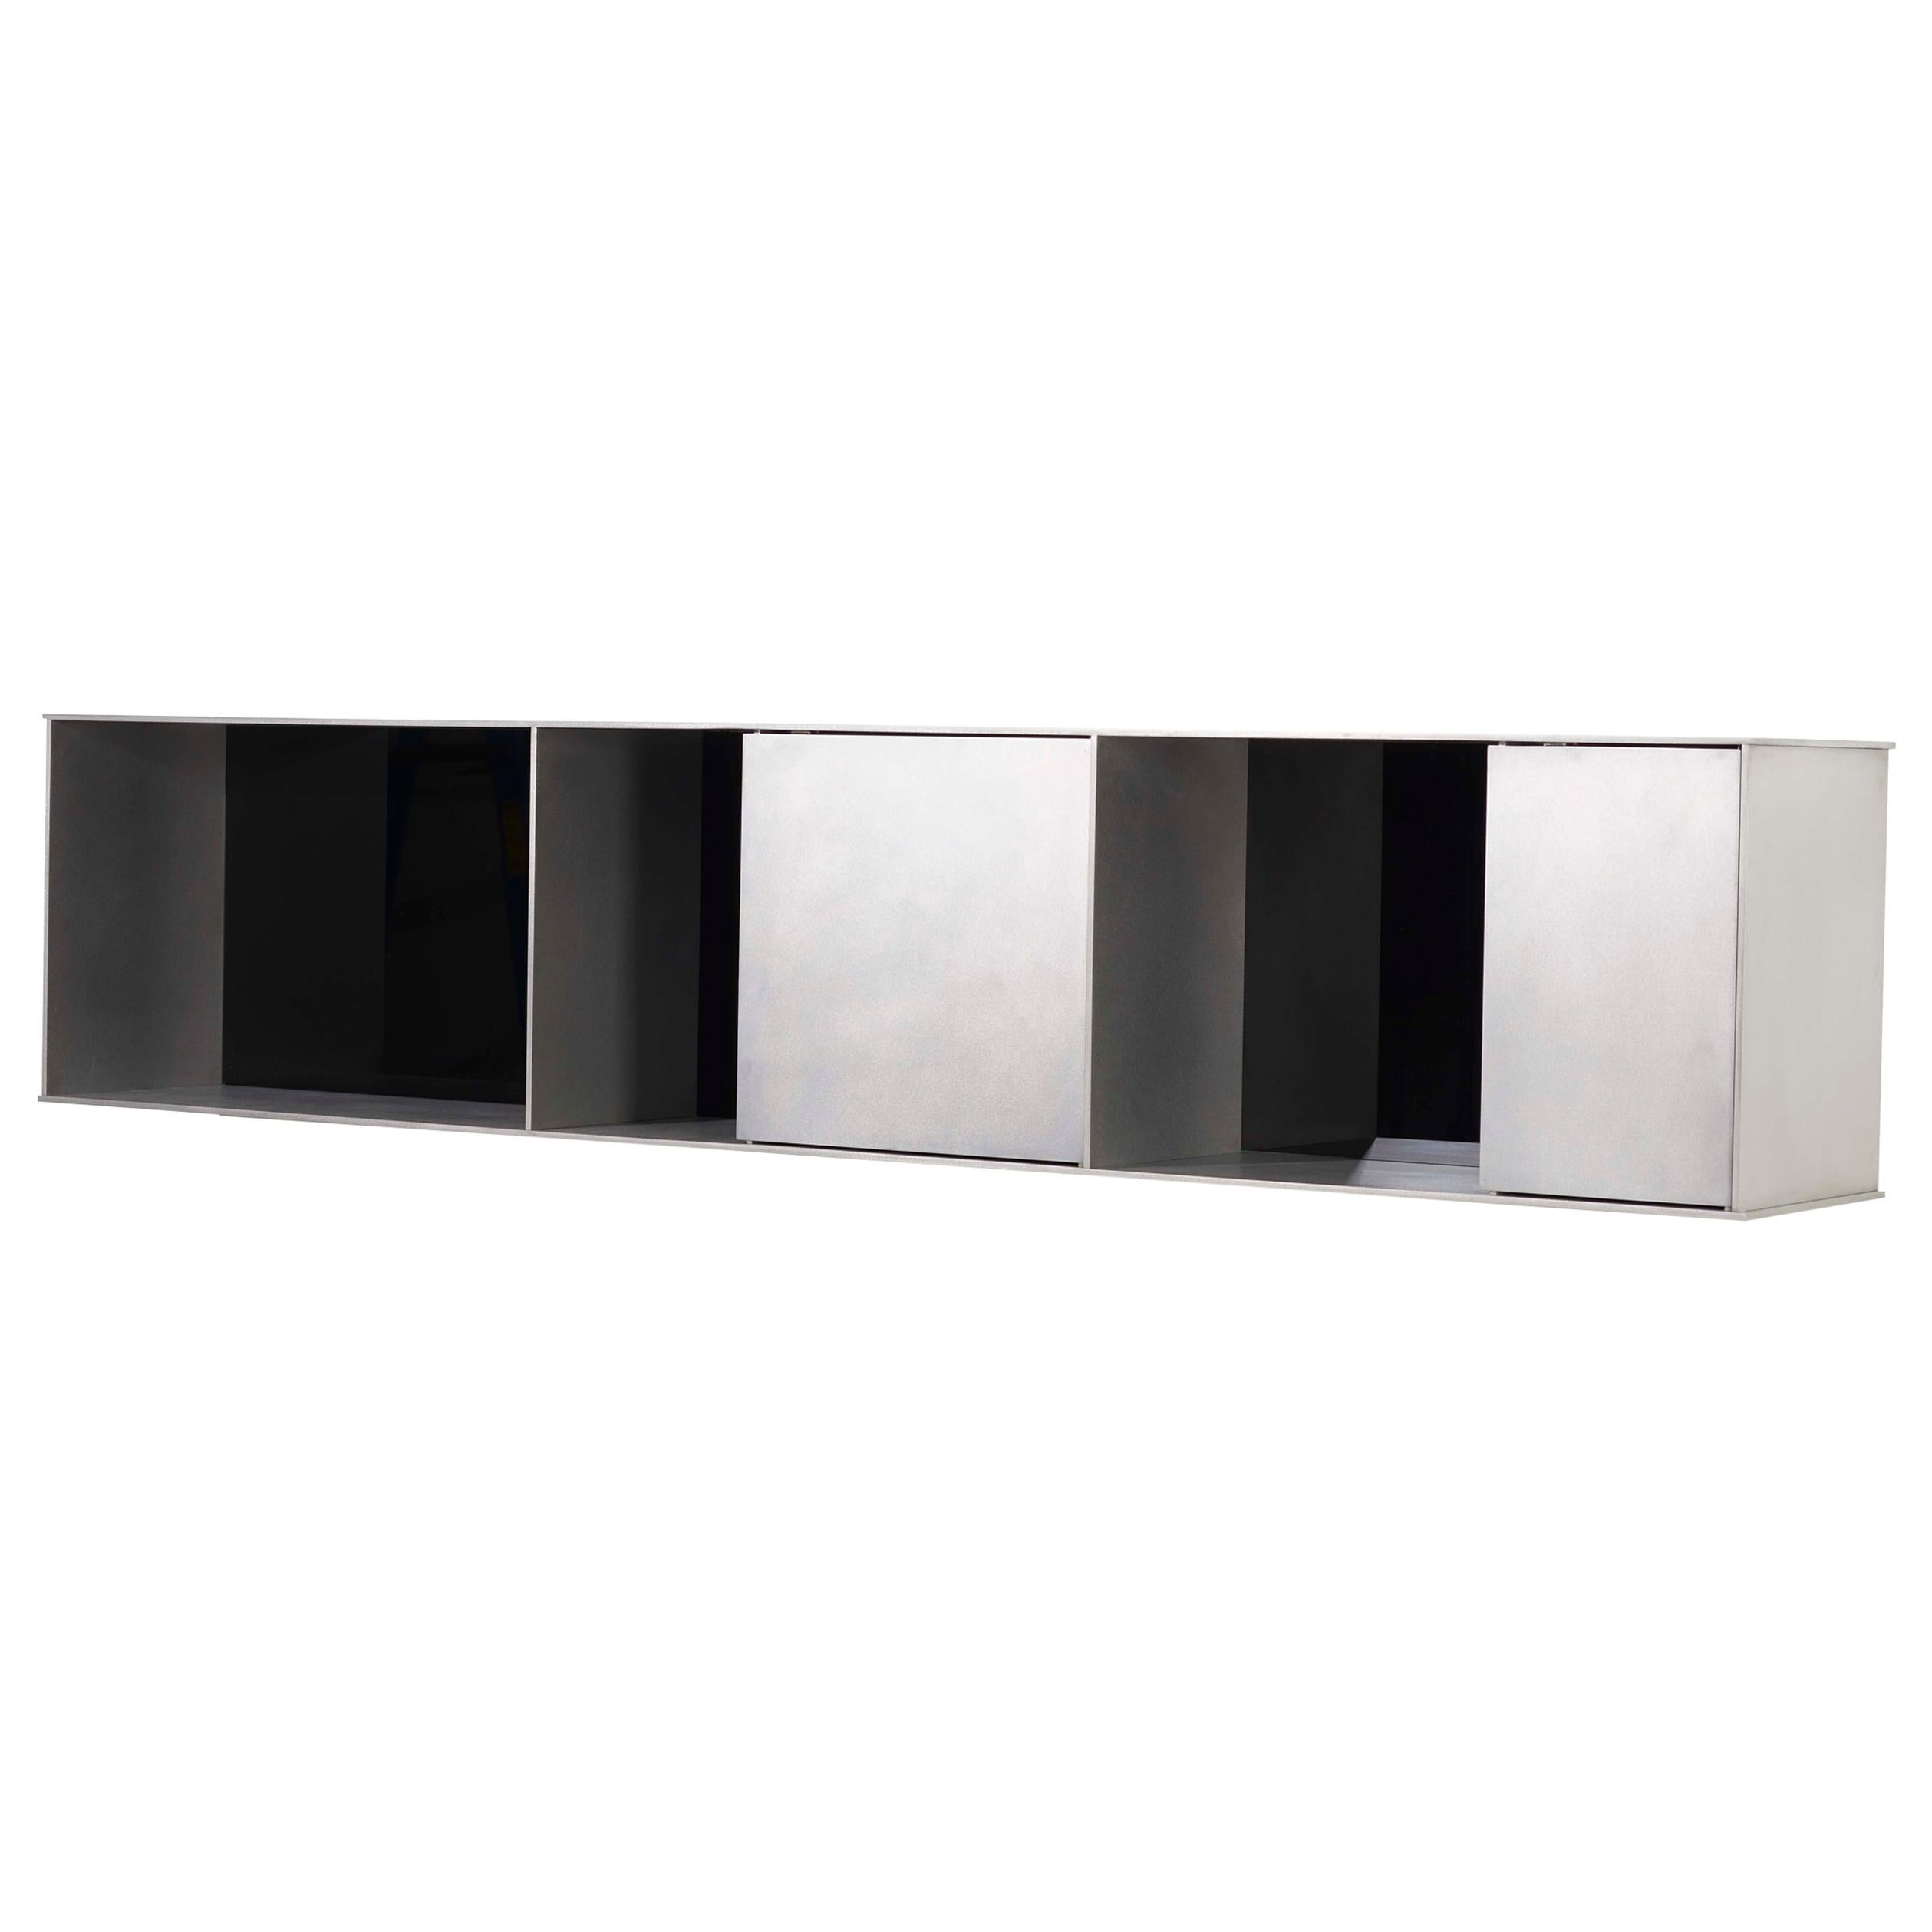 G Wall-Mounted Shelf with Doors in Waxed Aluminum Plate by Jonathan Nesci